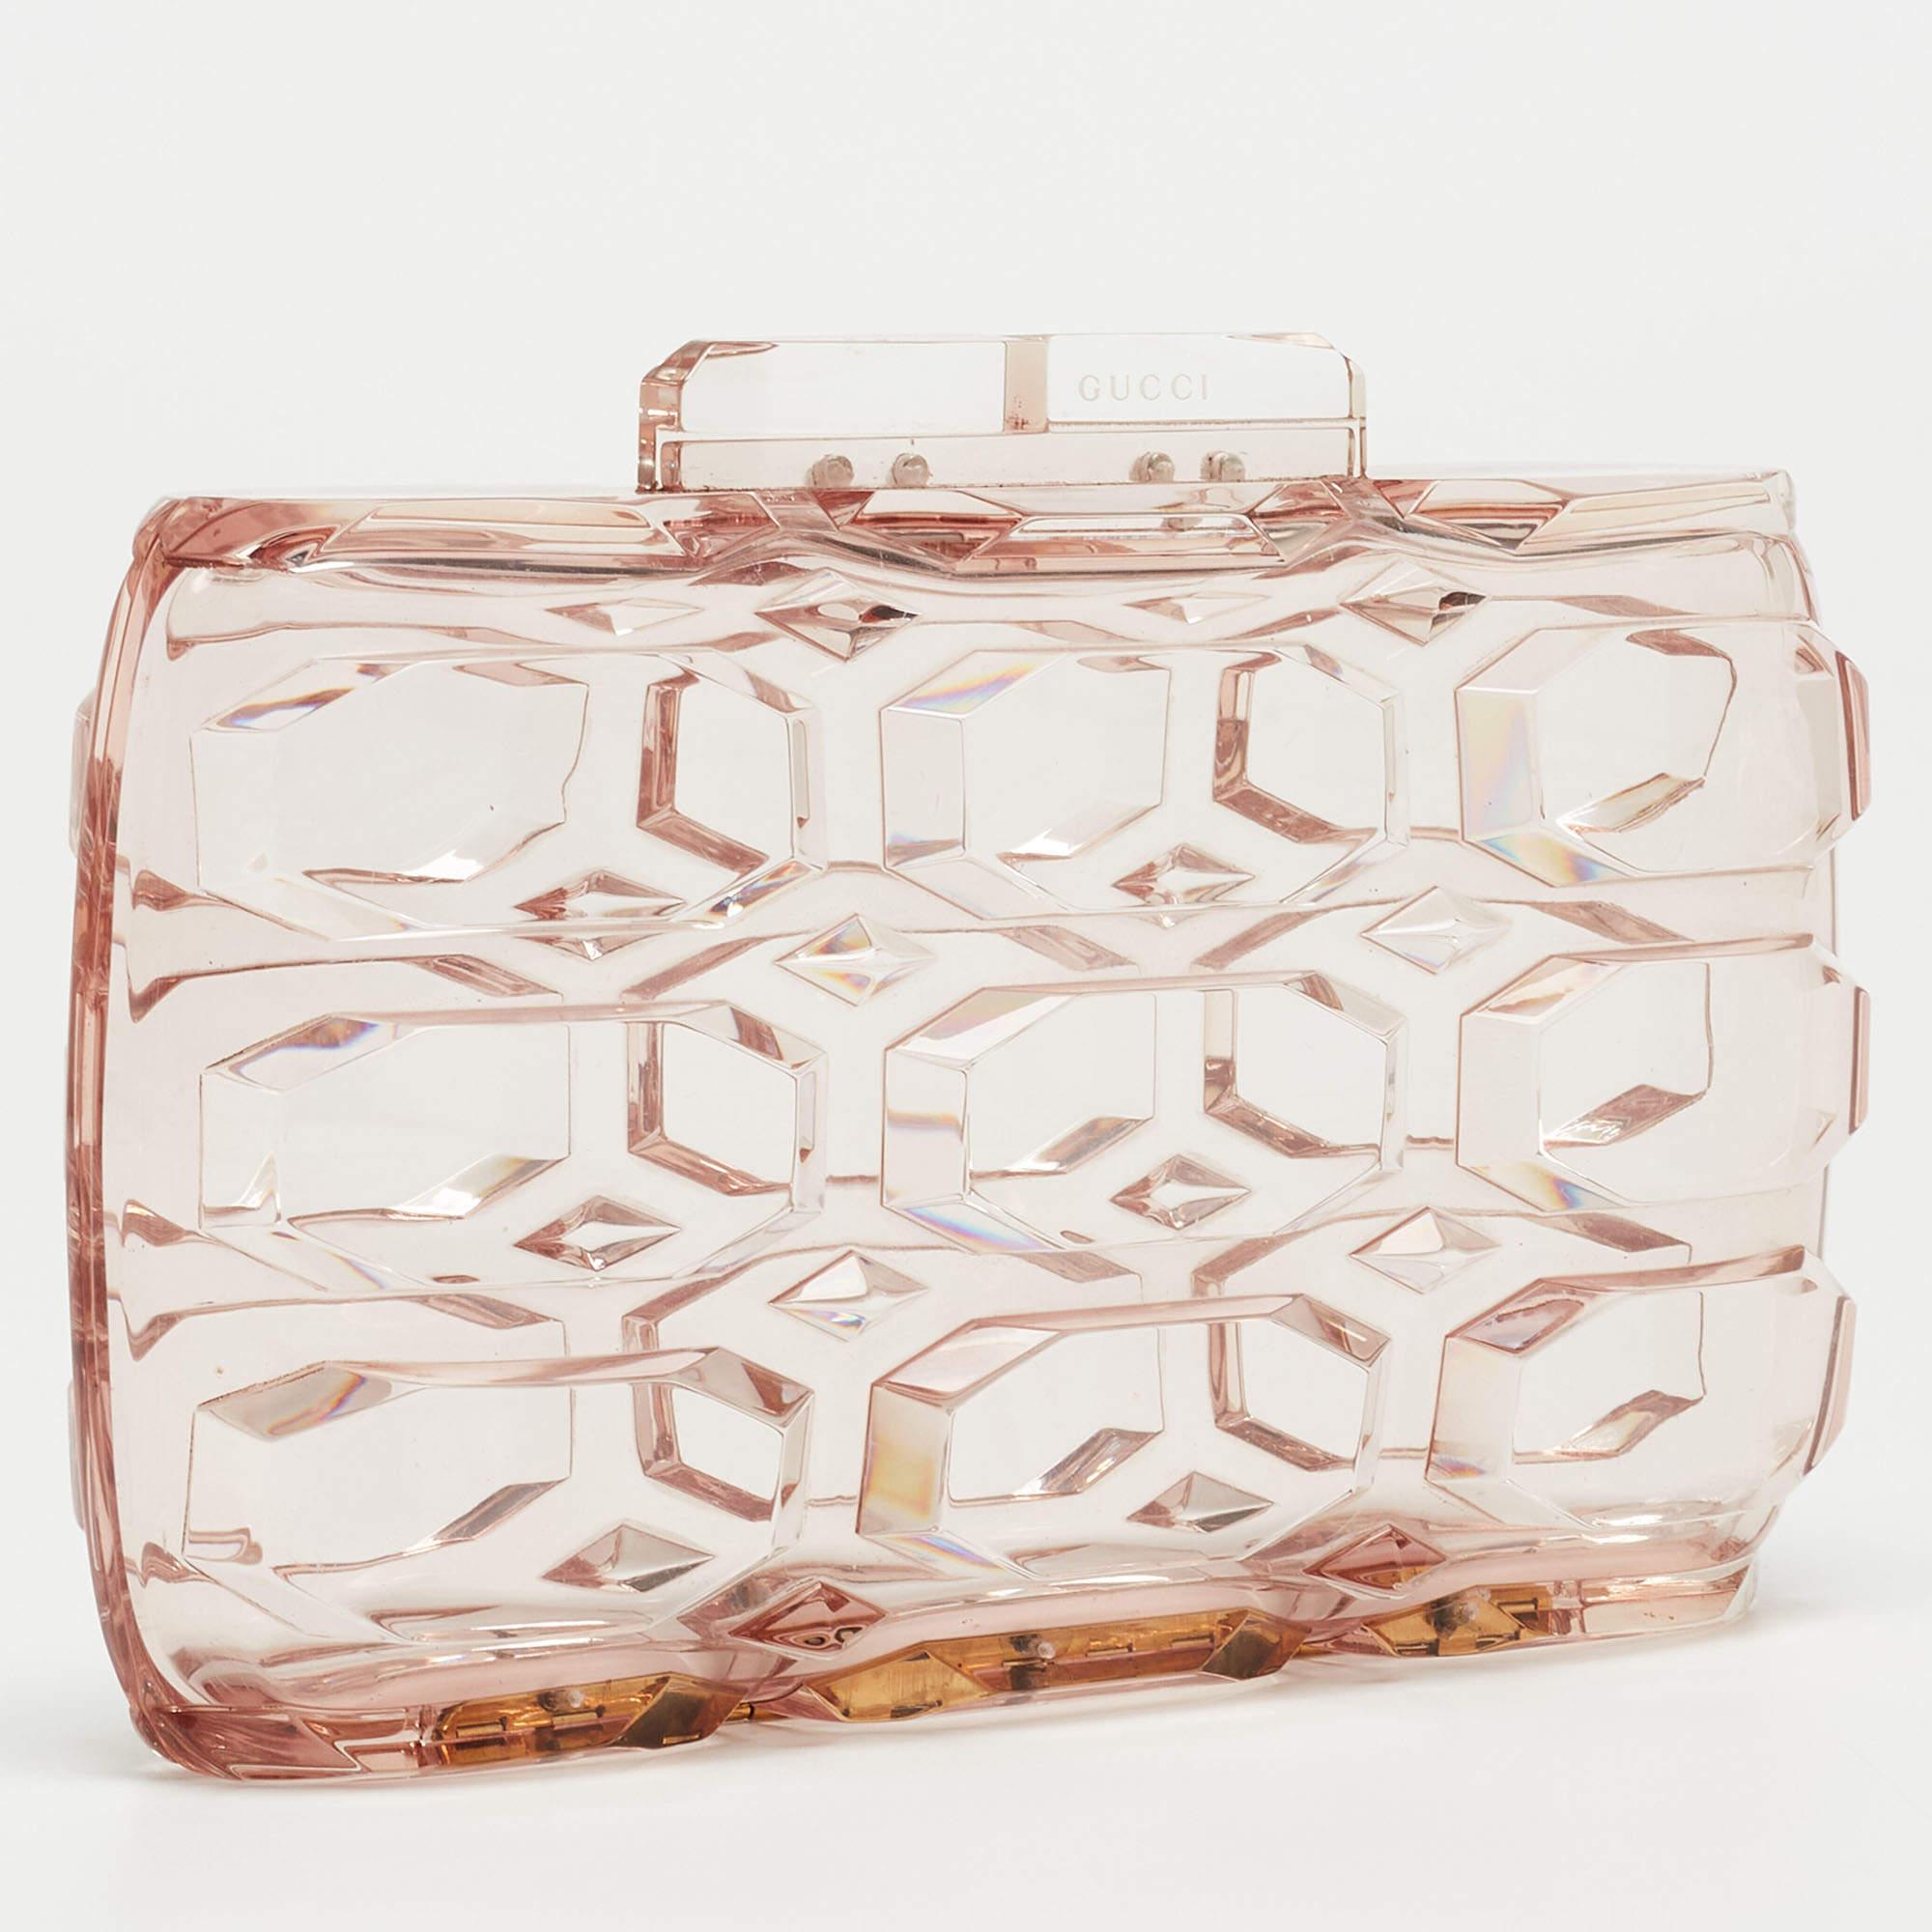 This Gucci clutch for women has the kind of design that ensures high appeal, whether held in your hand or tucked under your arm. It is a meticulously crafted piece bound to last a long time.

